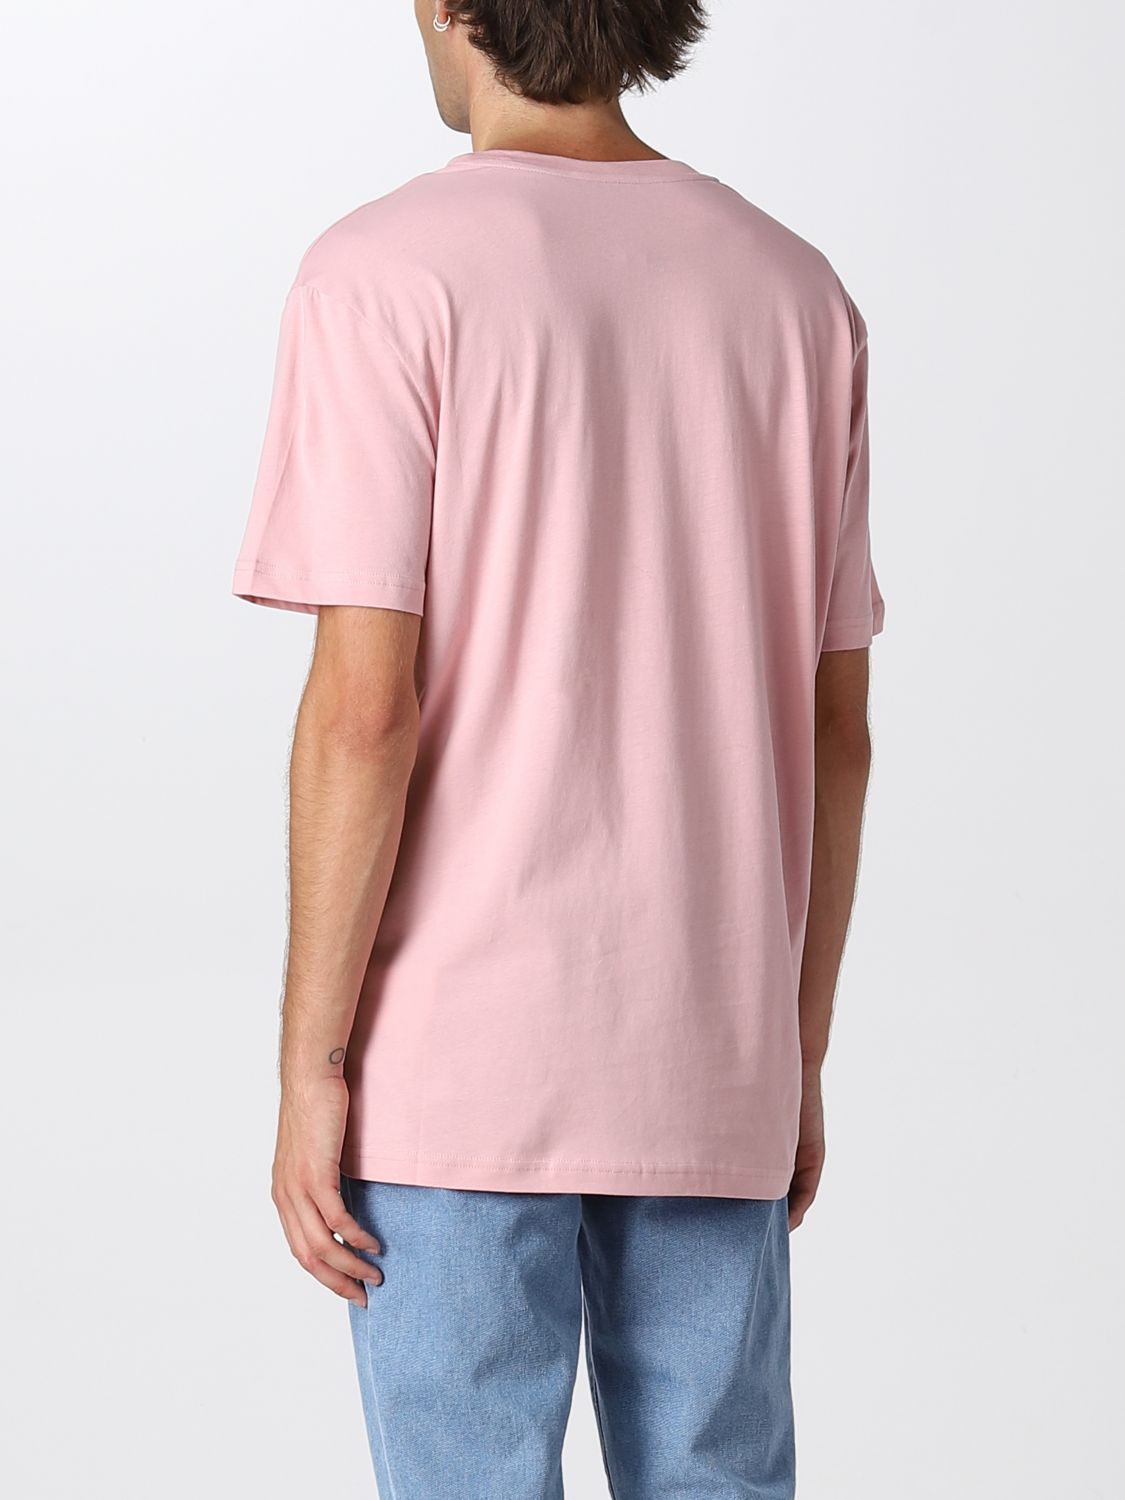 T-shirt Moschino Couture: Moschino Couture t-shirt for men pink 2